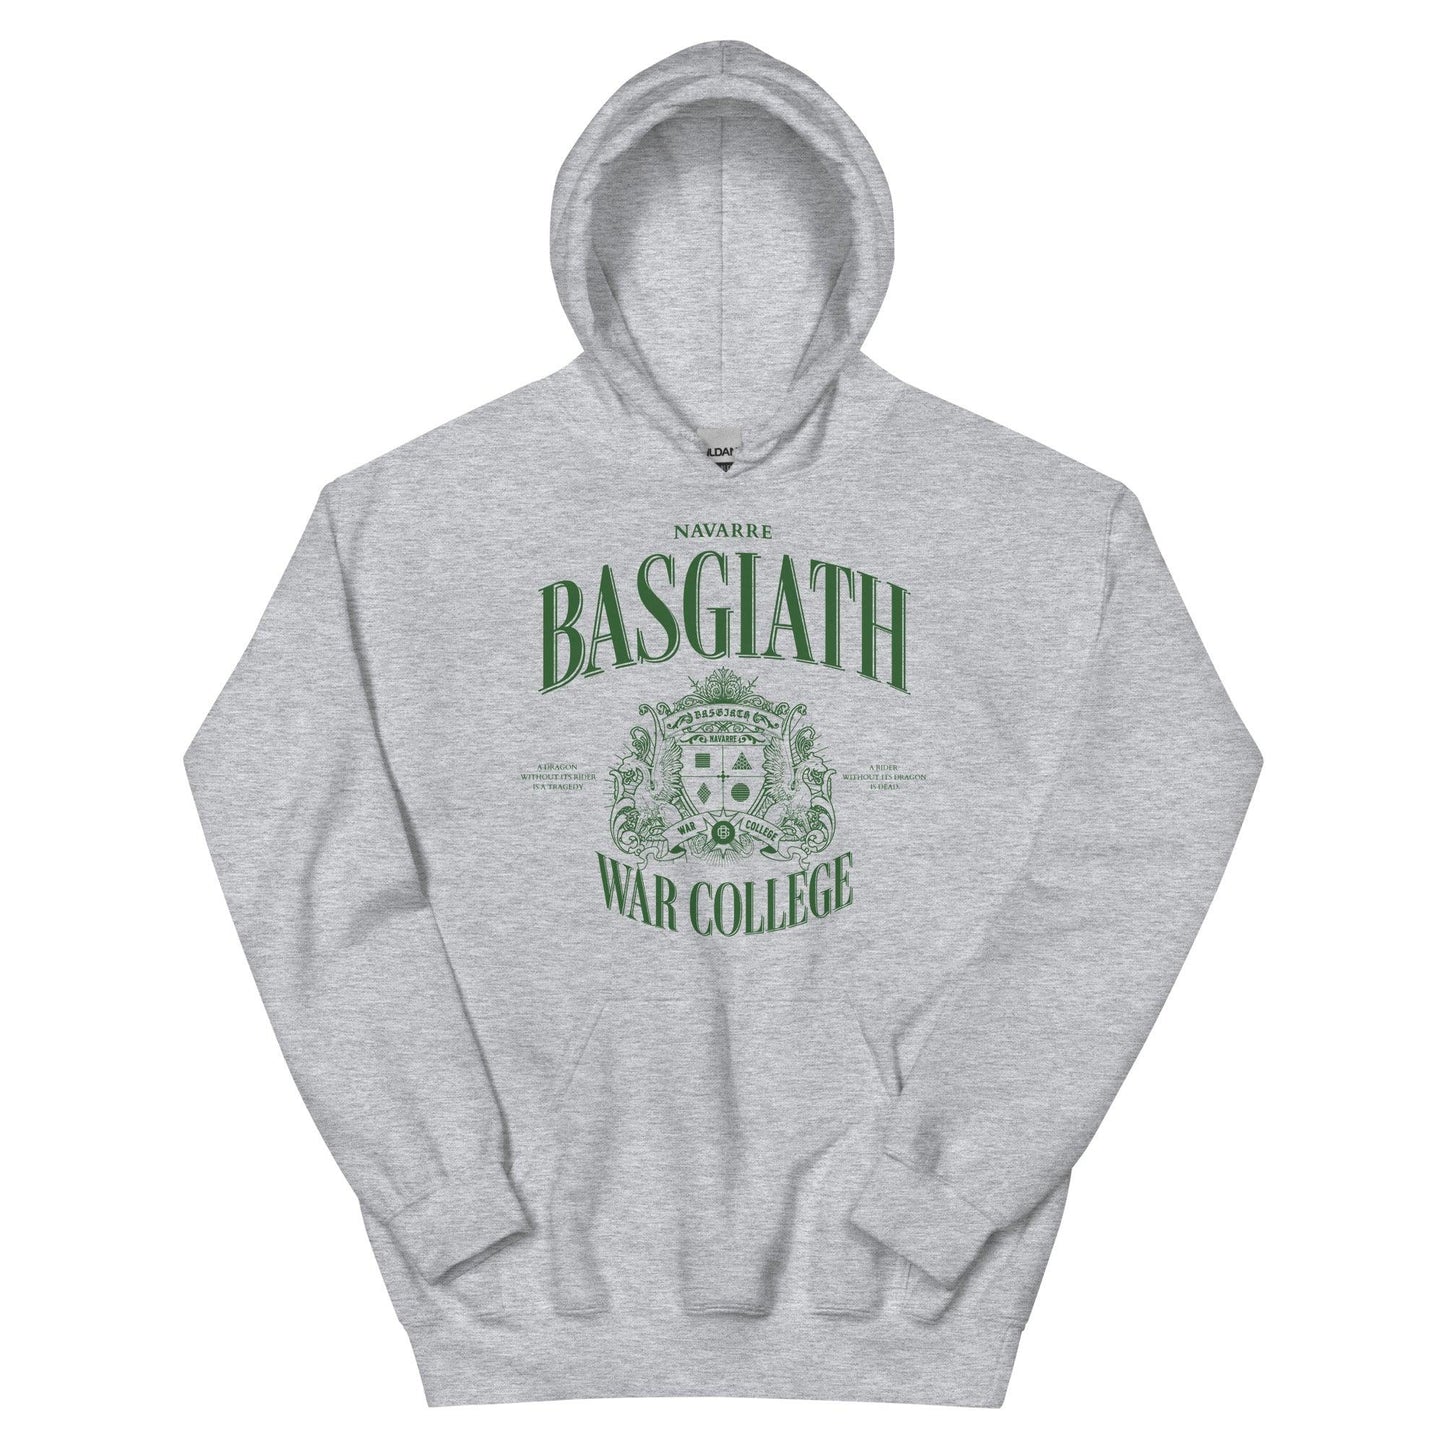 Basgiath War College Hooded Sweater - The Bean Workshop - fourth wing, hoodie, rebecca yarros